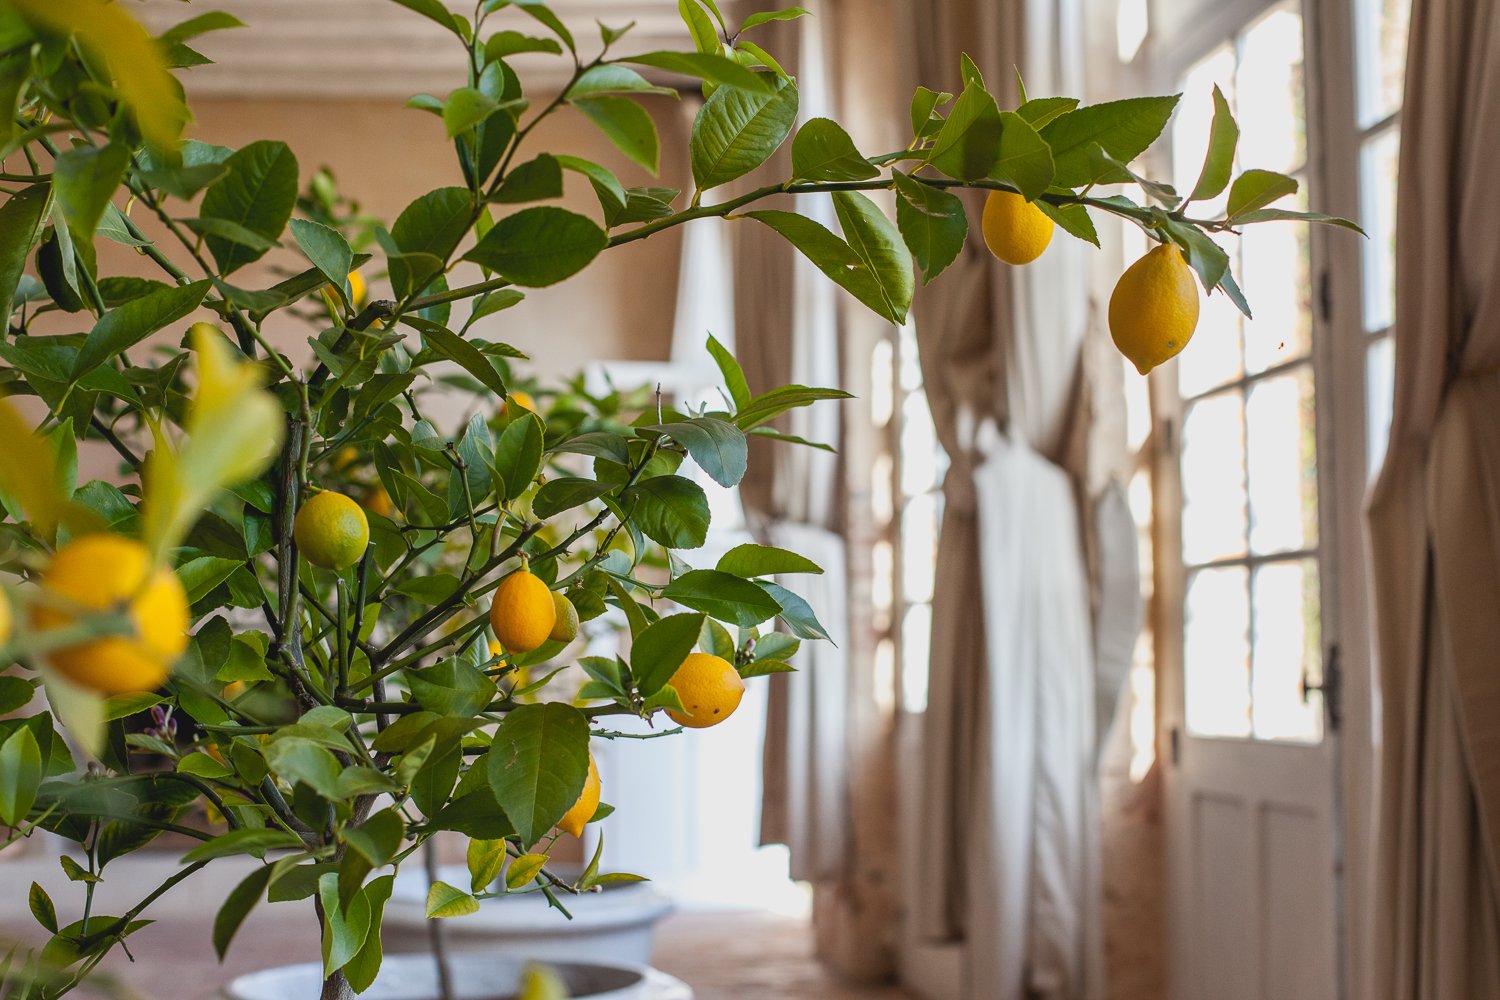 A lemon tree in the Orangerie at Chateau de Courtomer, available to hire for parties and other events.